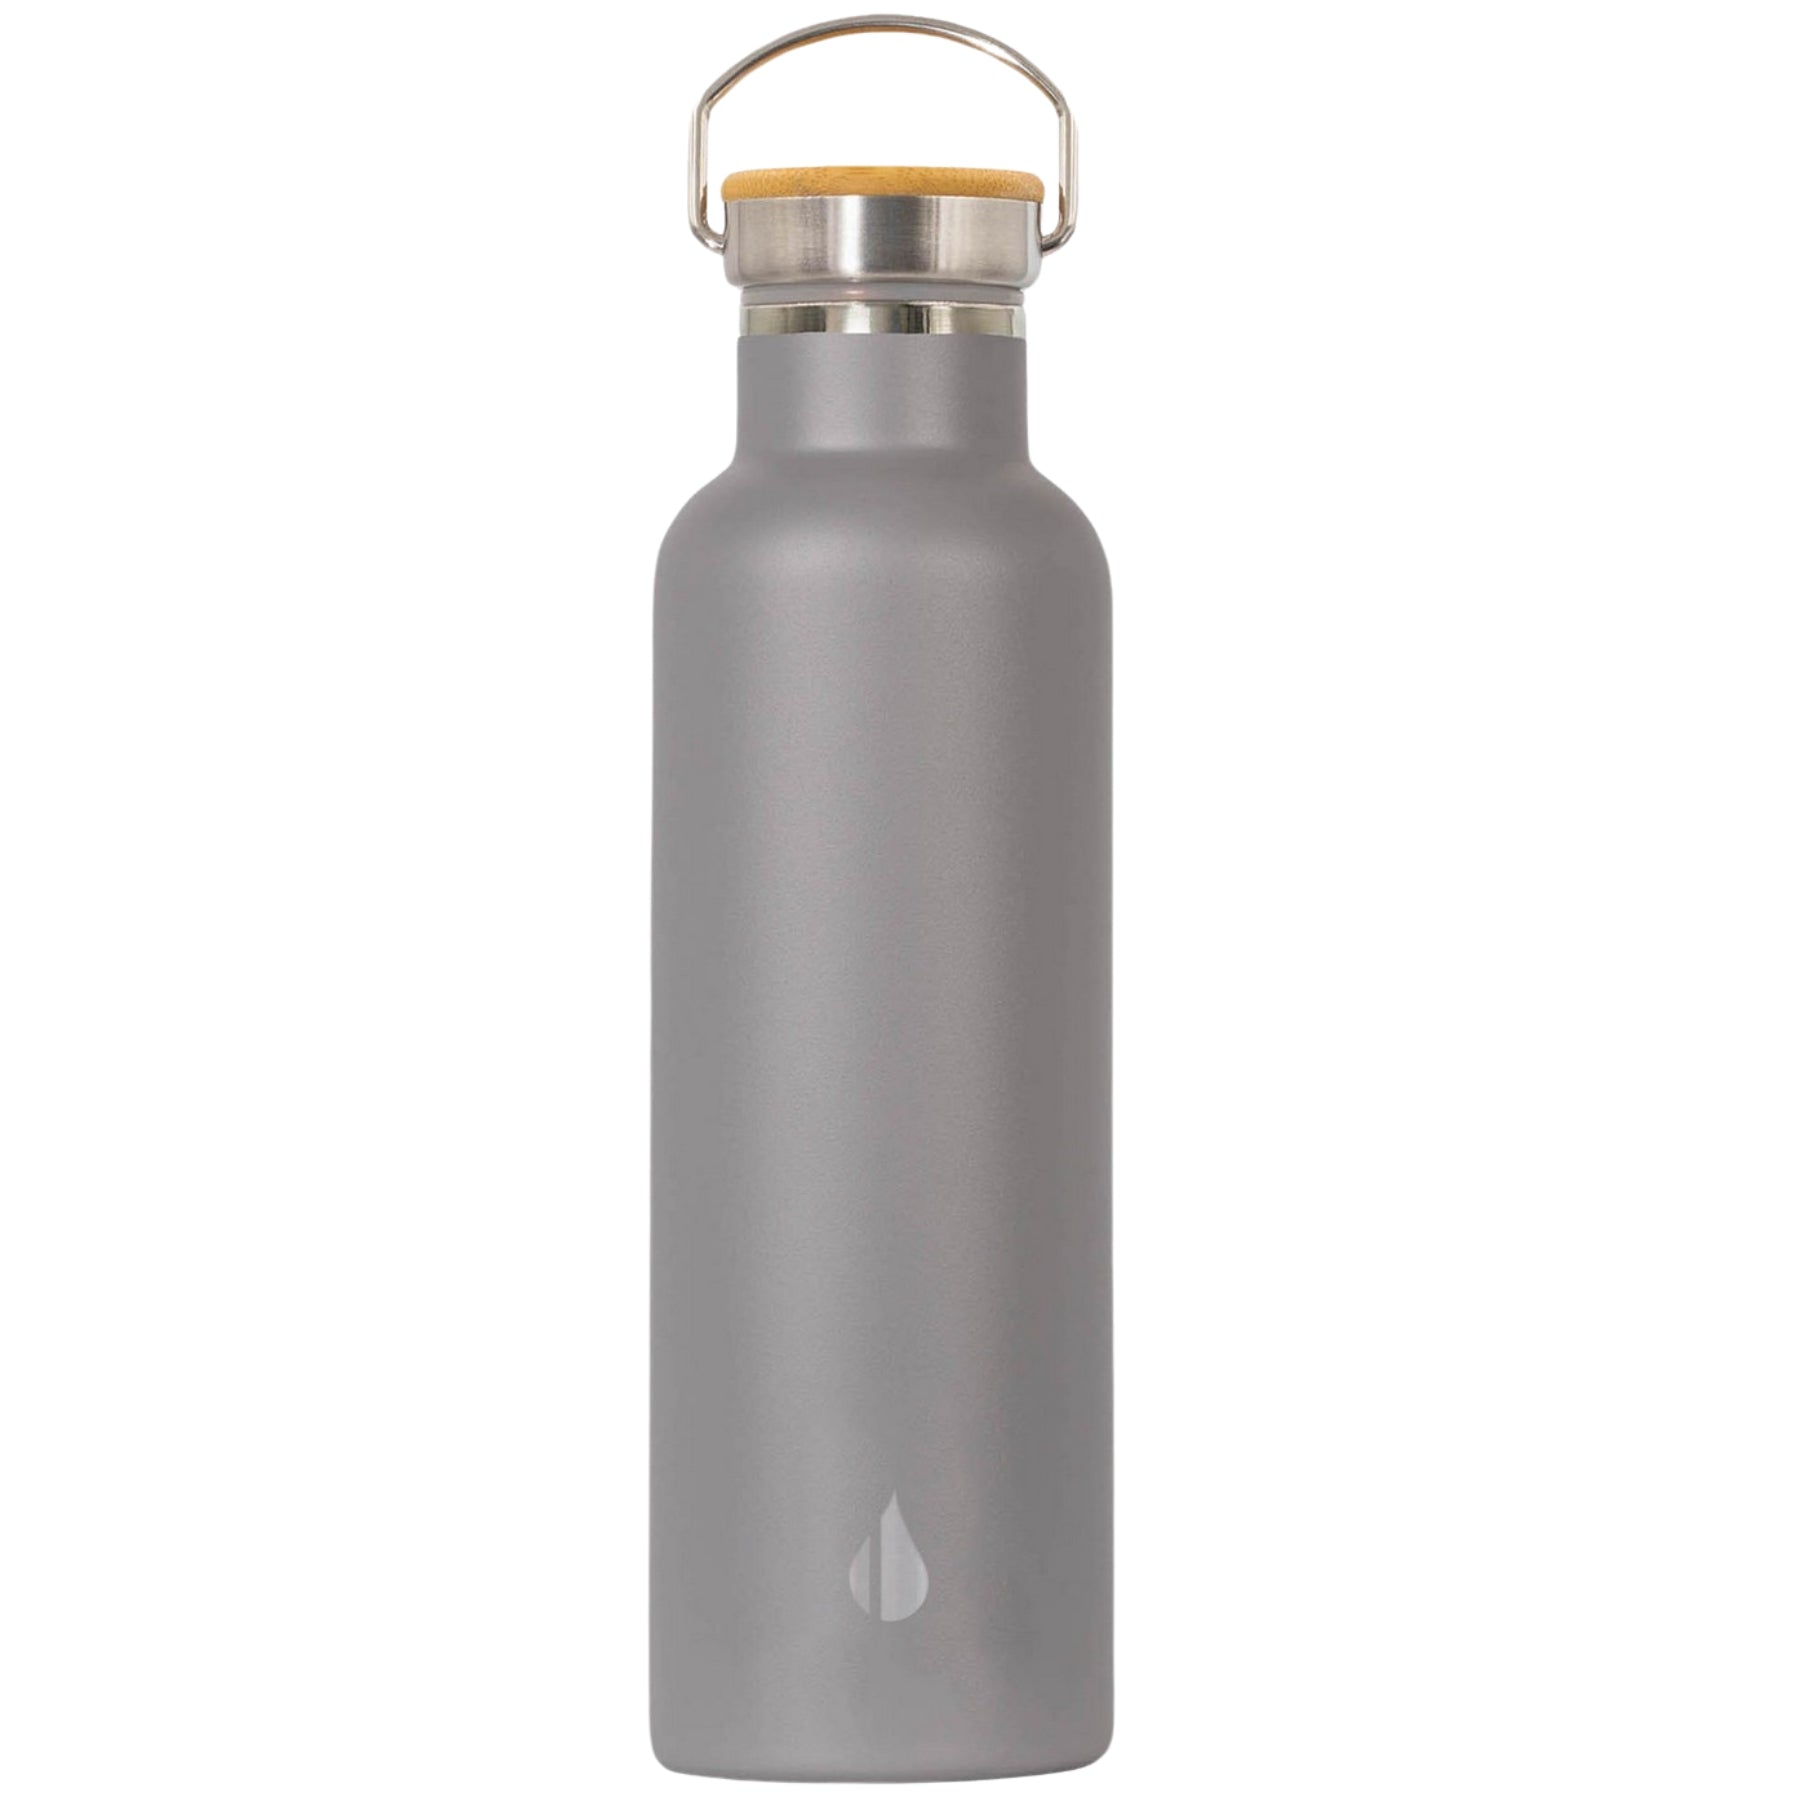 Customizable Elemental® 25 oz Stainless Steel Insulated Bottle in graphite gray